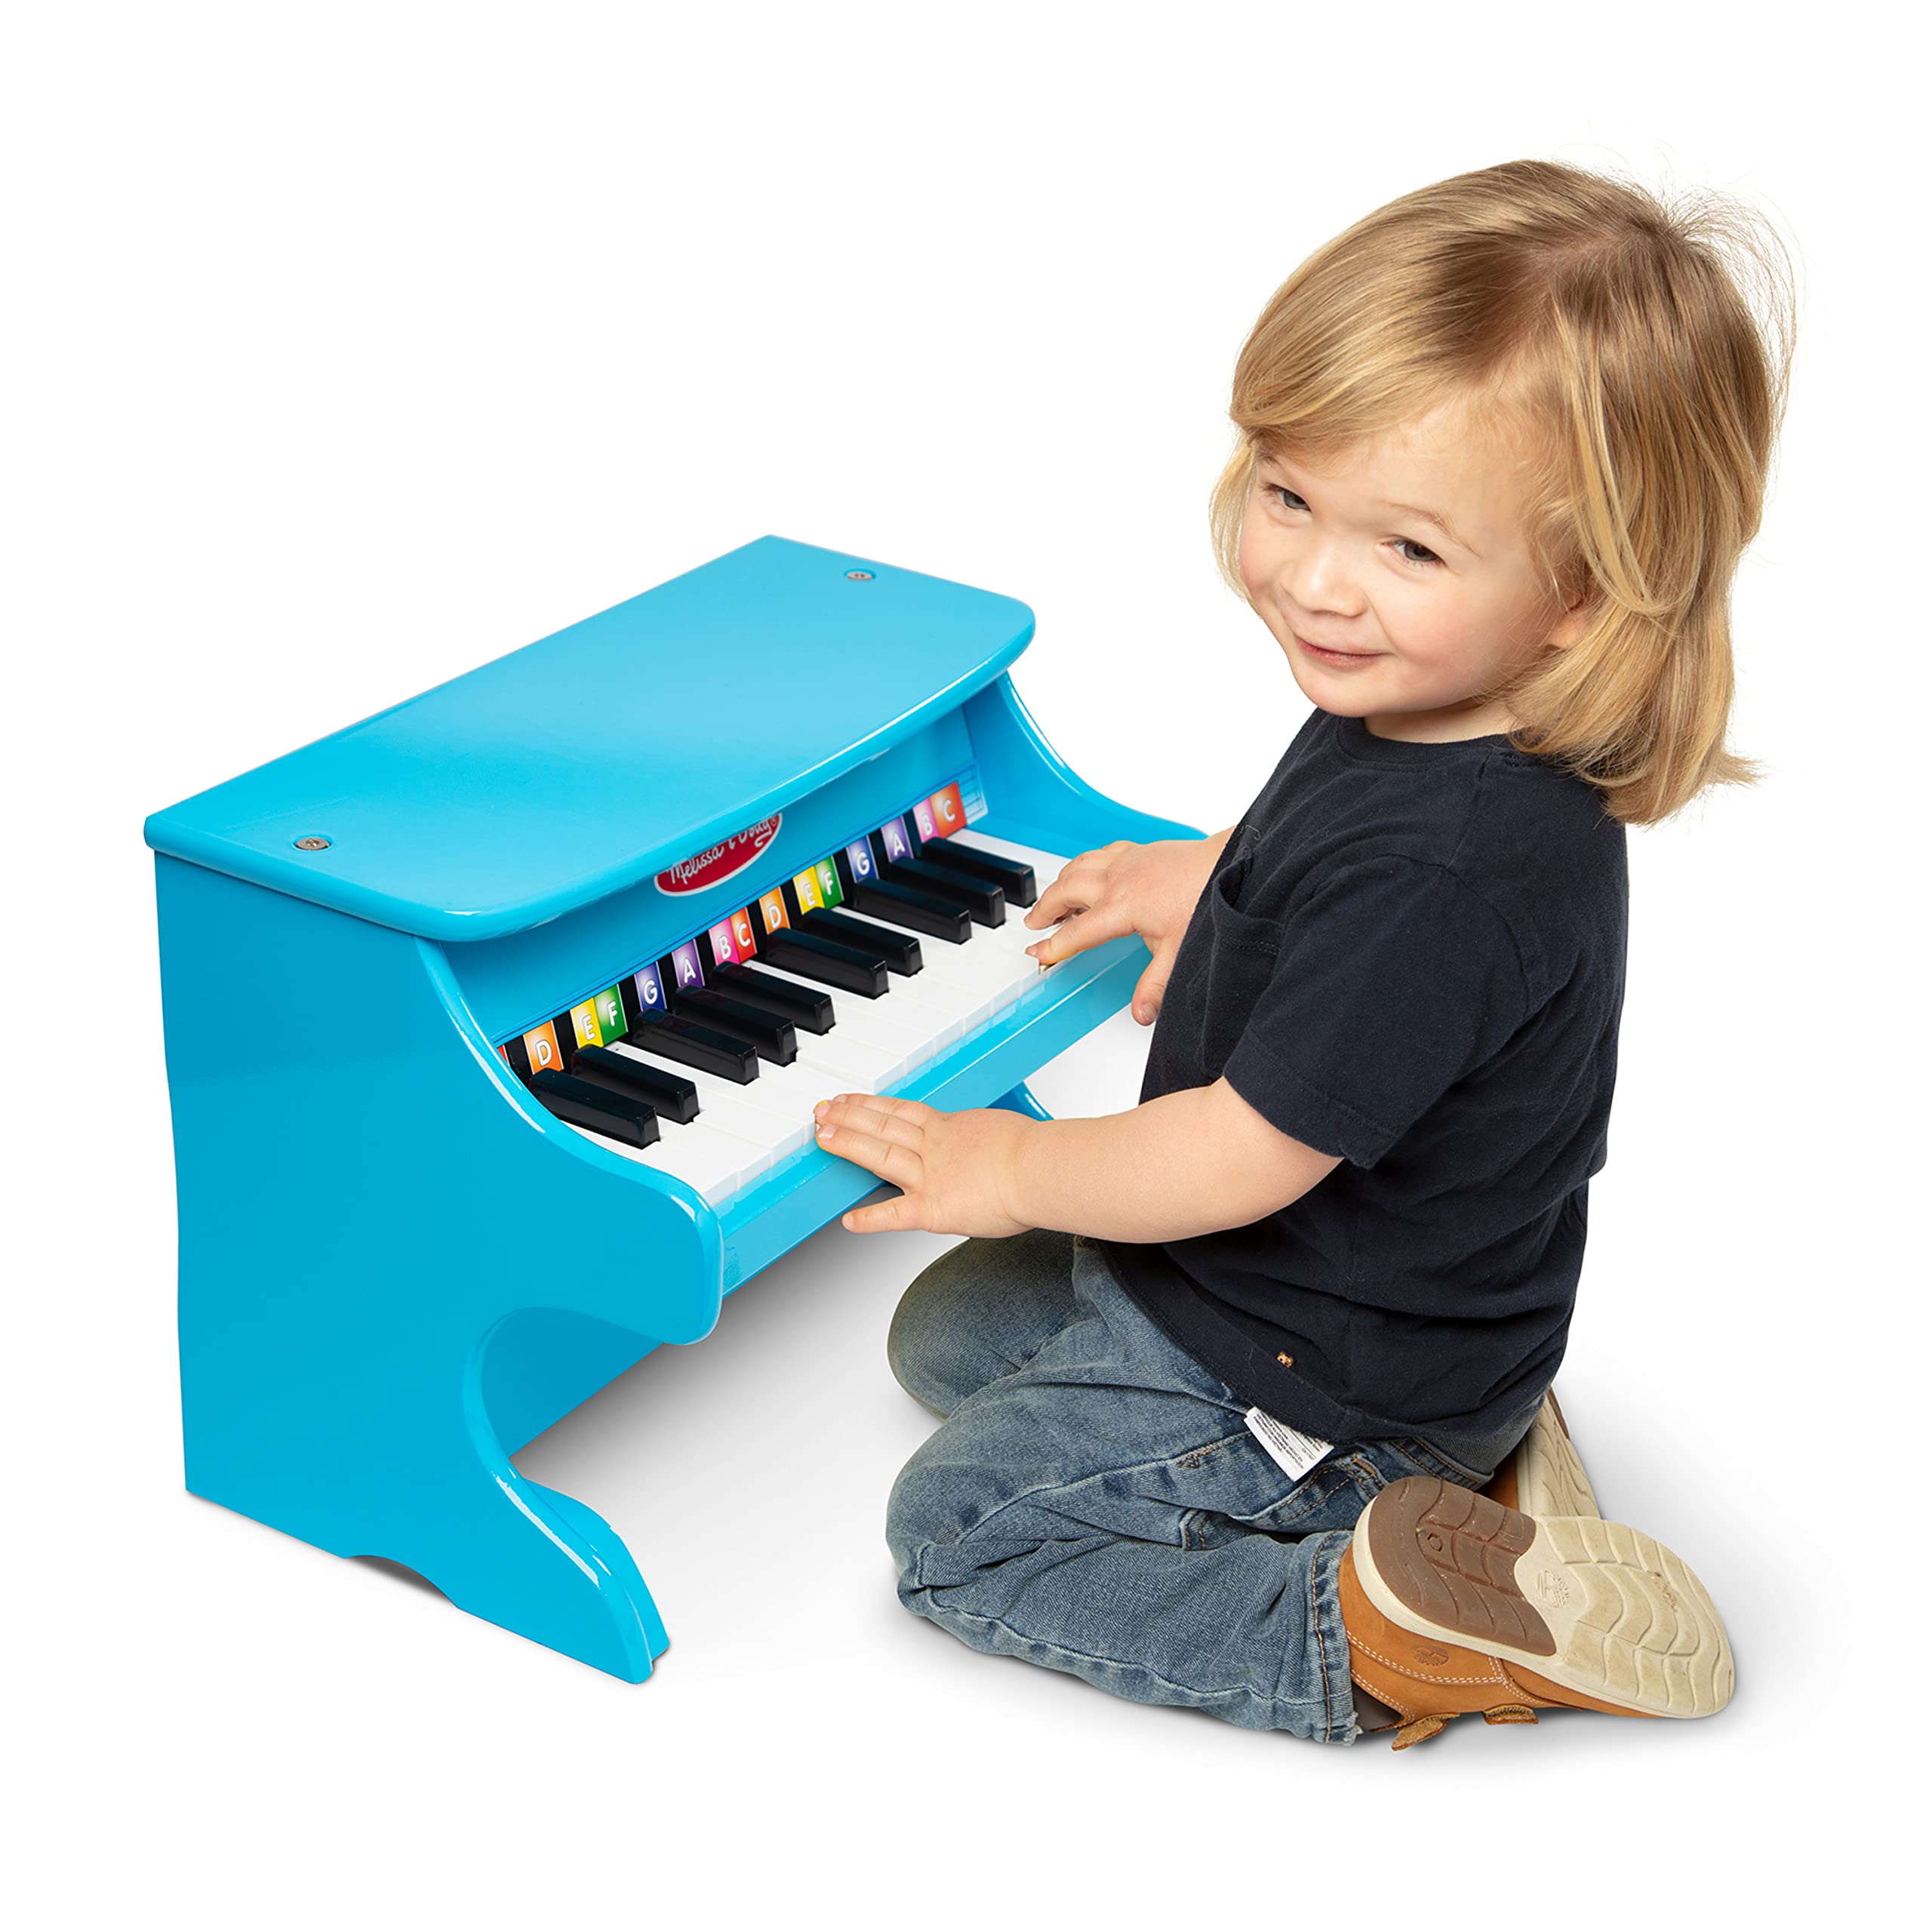 Melissa & Doug Learn-to-Play Piano With 25 Keys and Color-Coded Songbook - Blue - Toy Piano For Baby, Kids Piano Toy, Toddler Piano Toys For Ages 3+